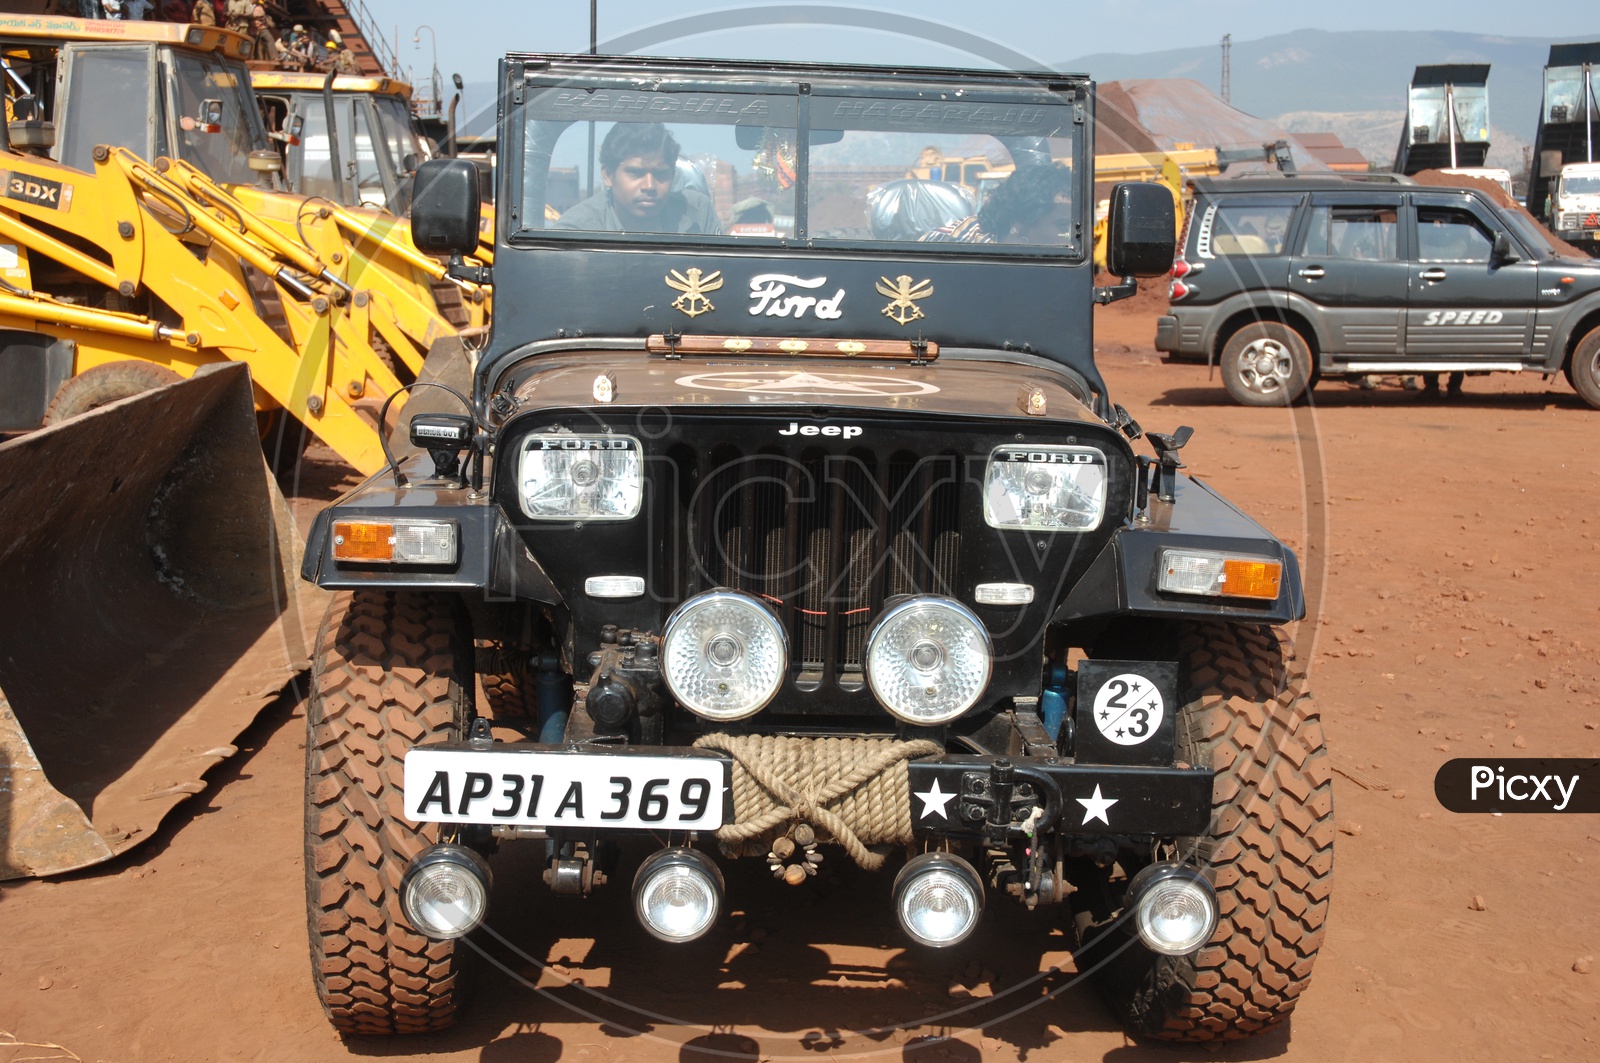 Open Top Jeep In Mining Area